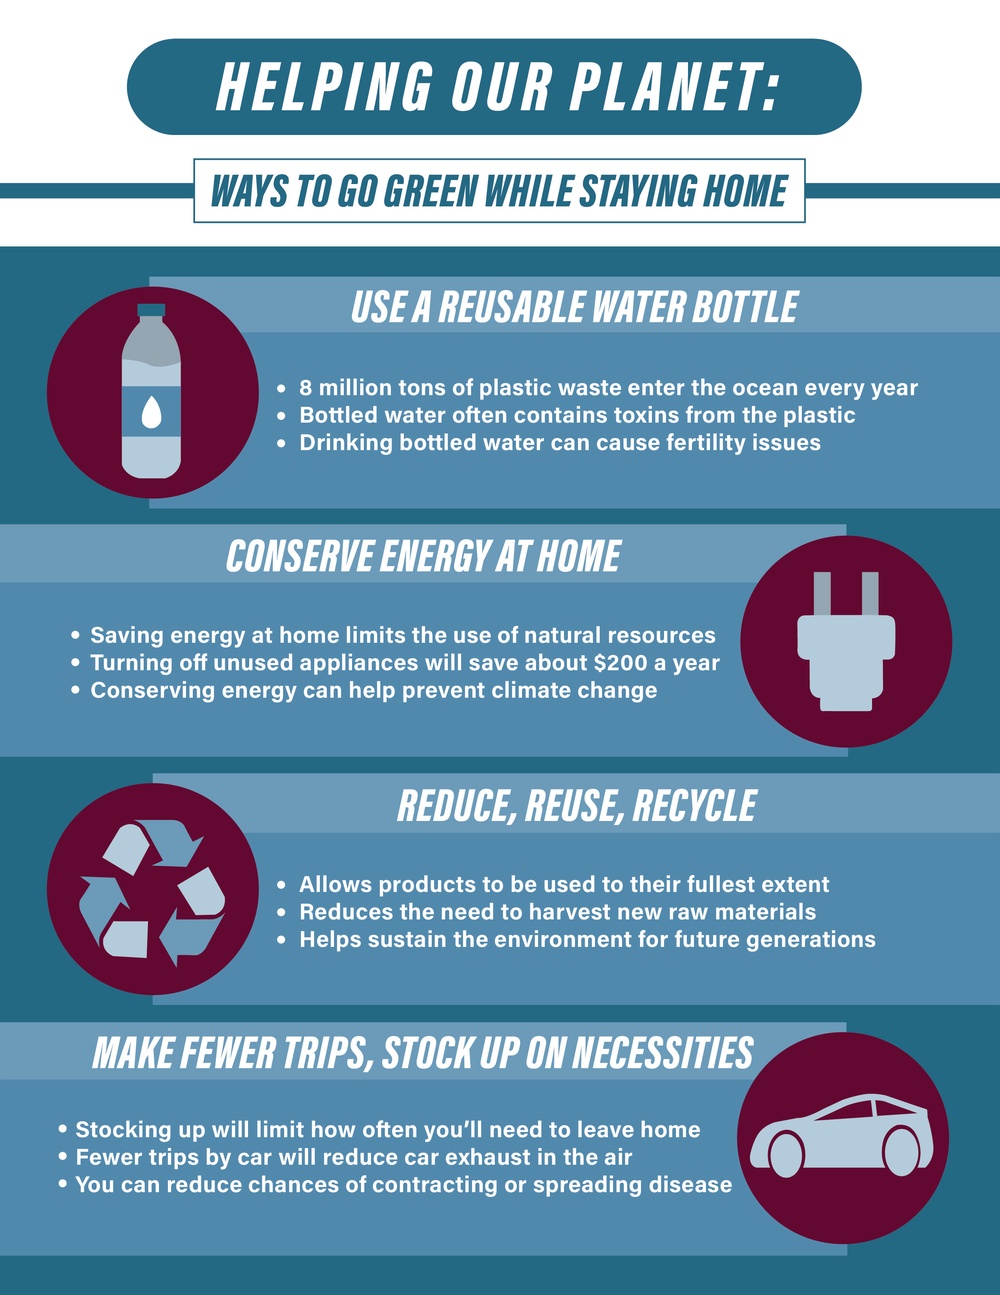 Ways to Go Green While Staying Home